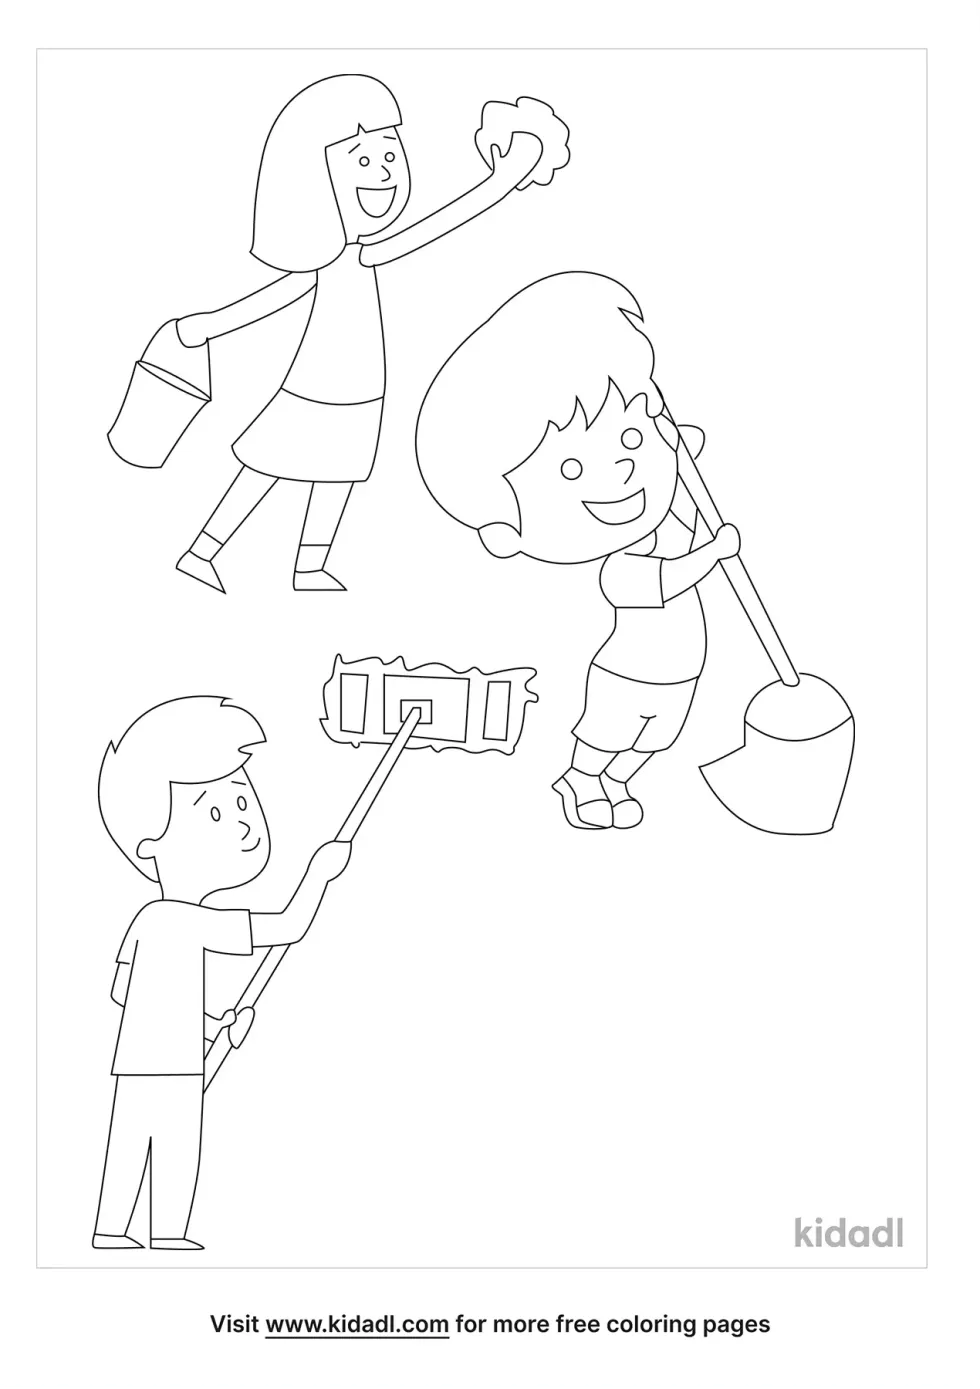 Willing Children Coloring Page